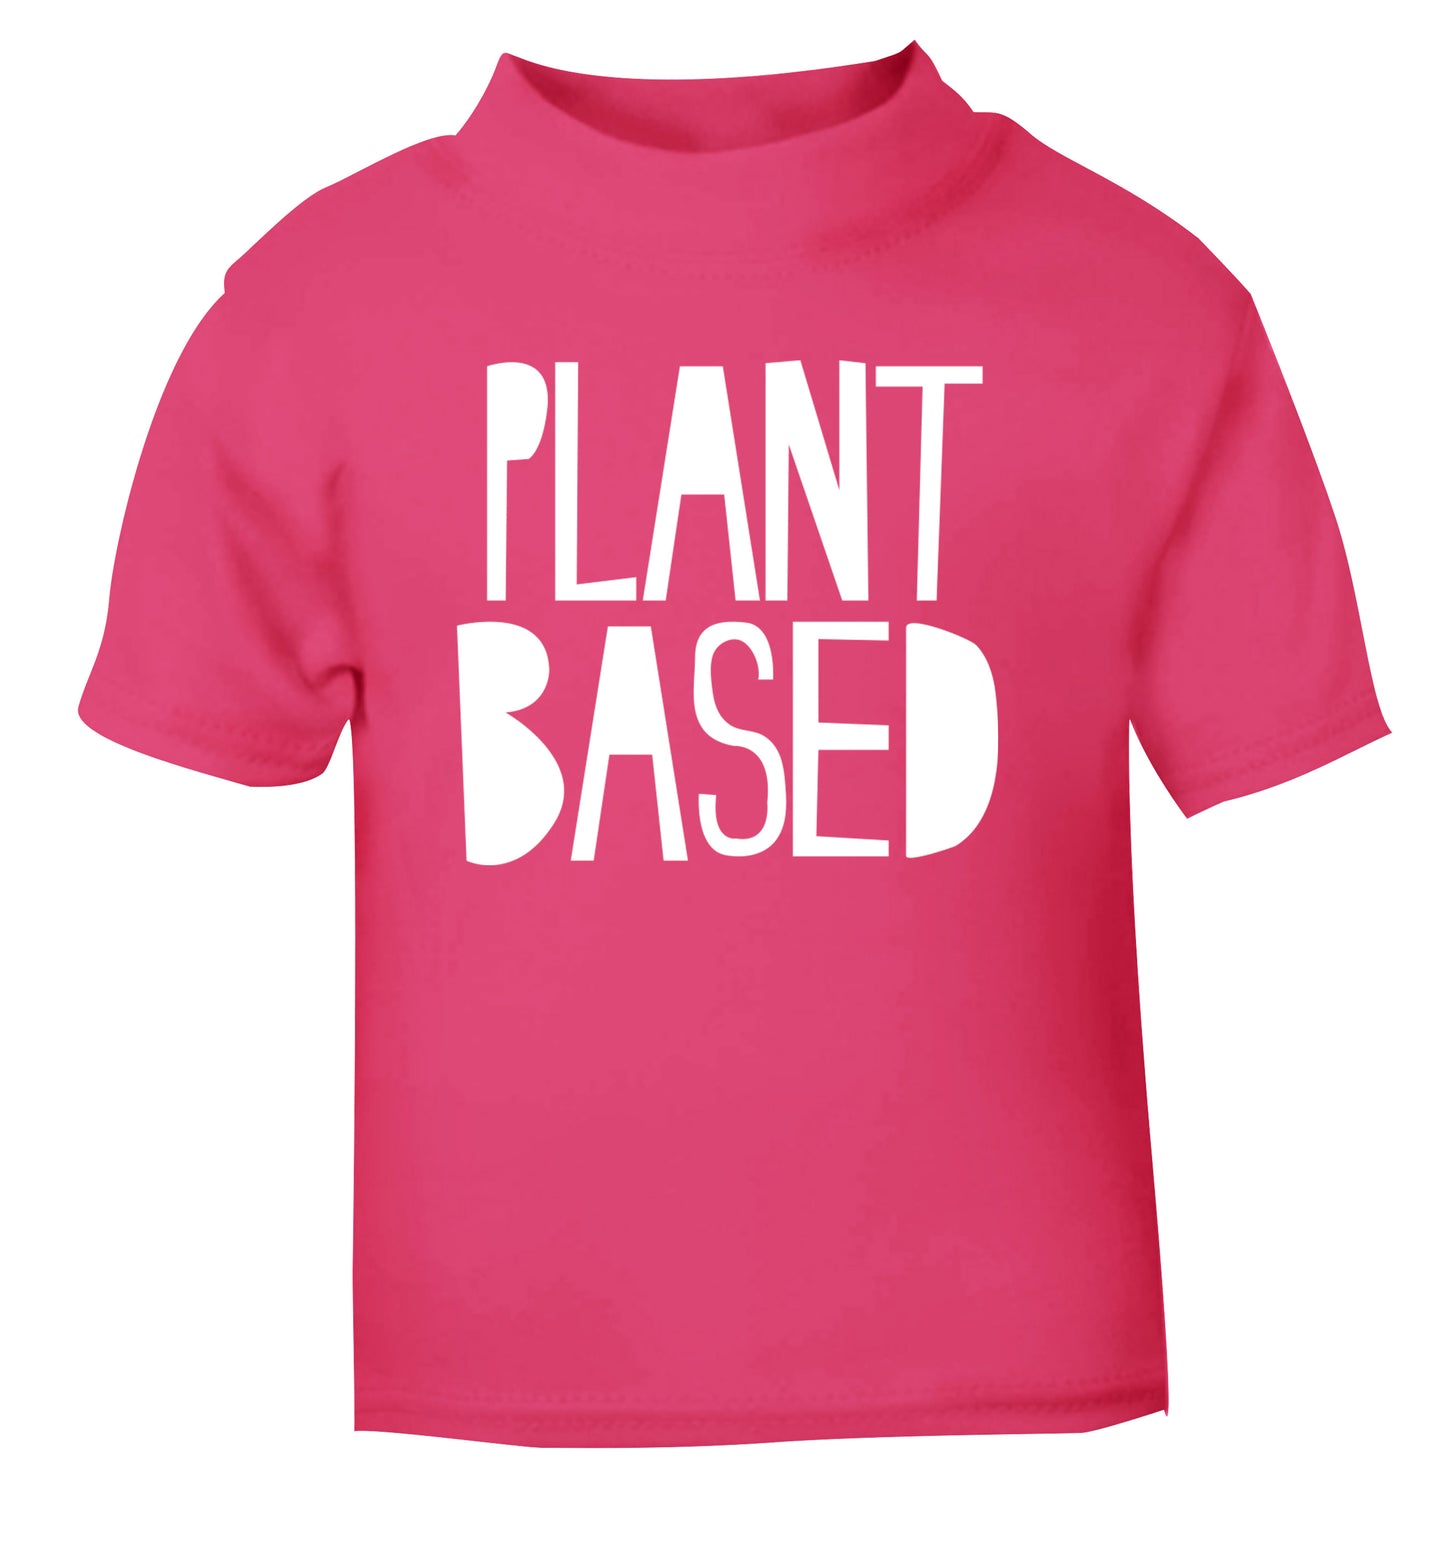 Plant Based pink Baby Toddler Tshirt 2 Years